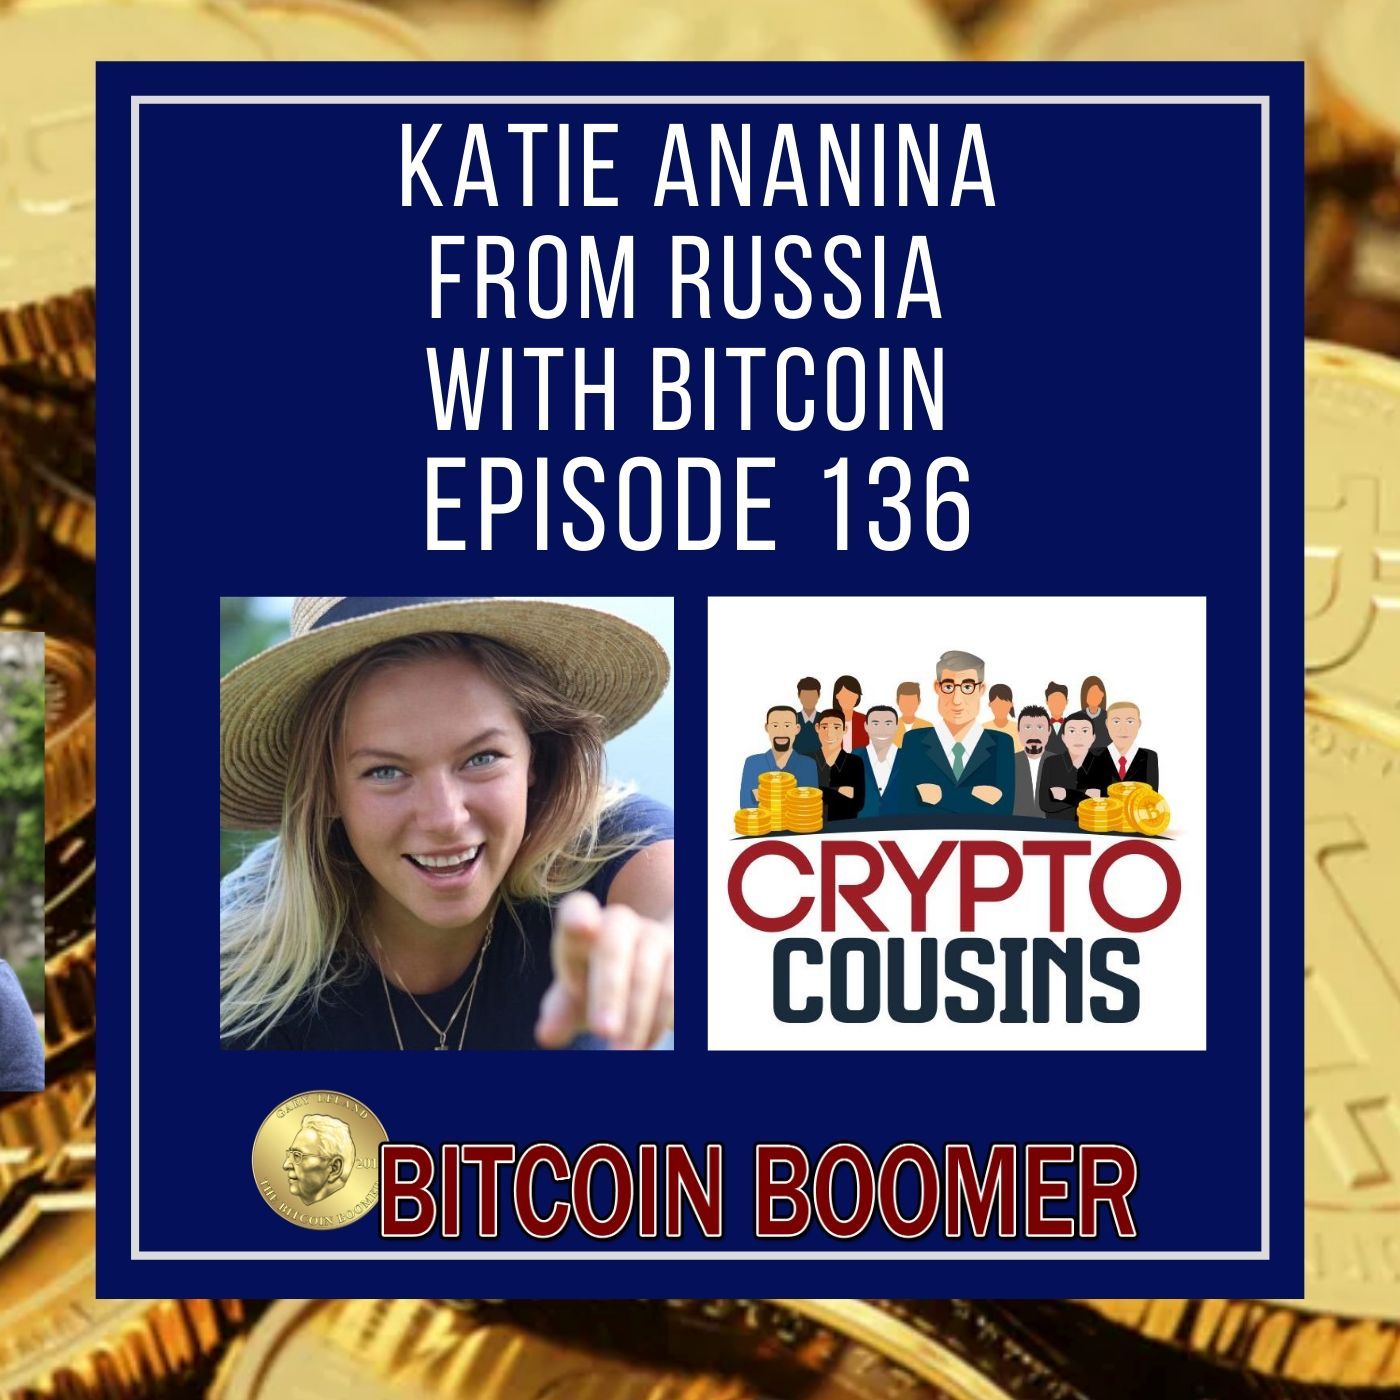 From Russia with Bitcoin - Katie Ananina